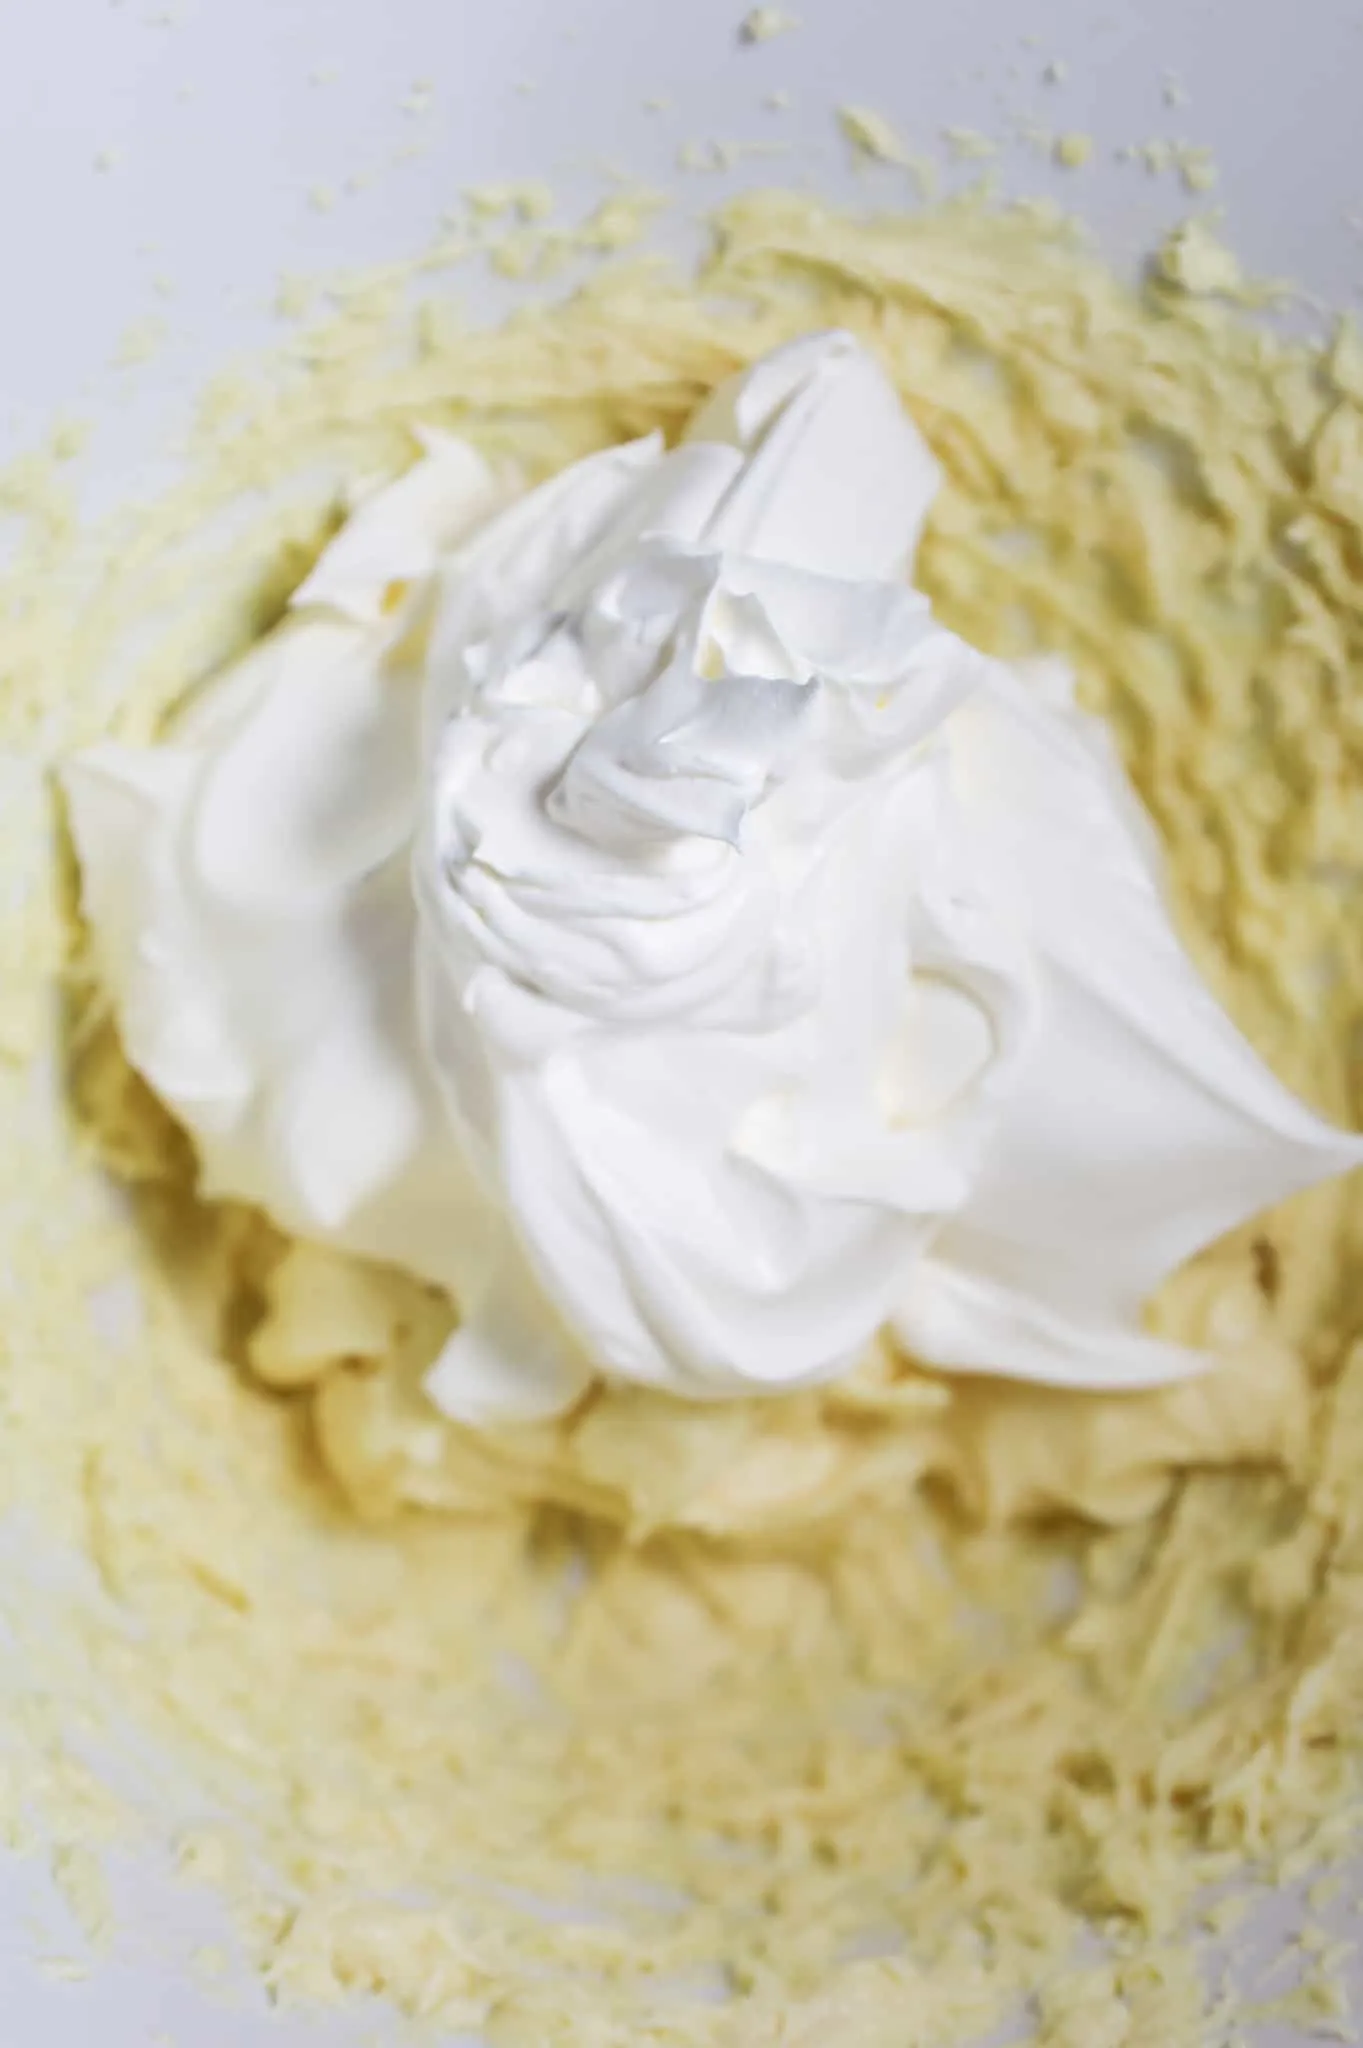 Cool Whip added to mixing bowl with cream cheese and vanilla pudding mixture